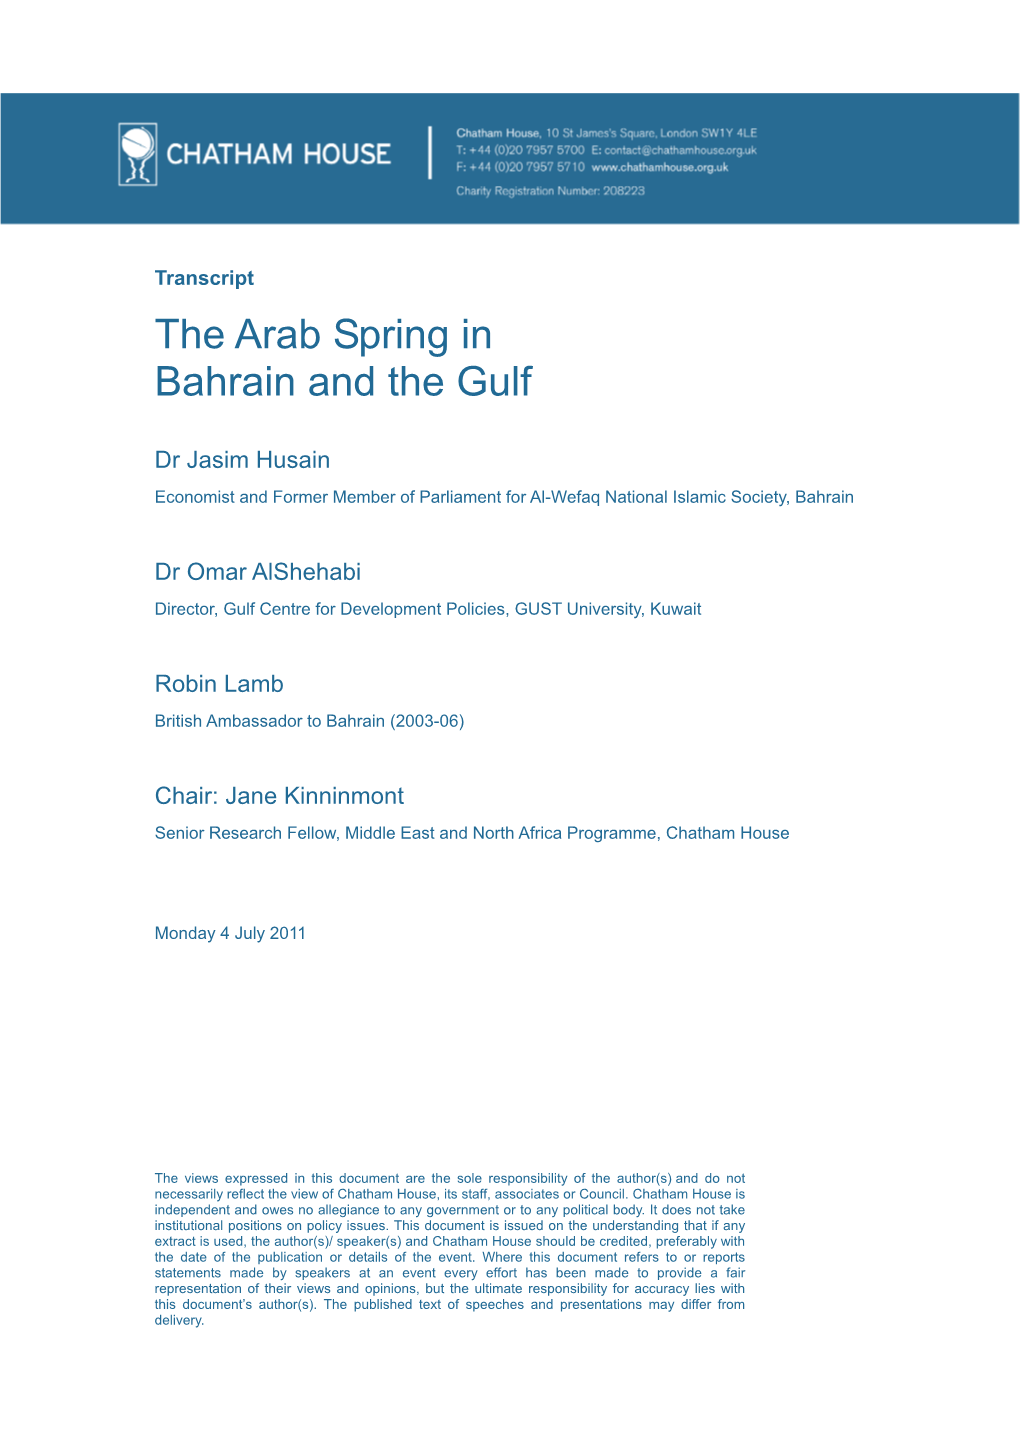 The Arab Spring in Bahrain and the Gulf